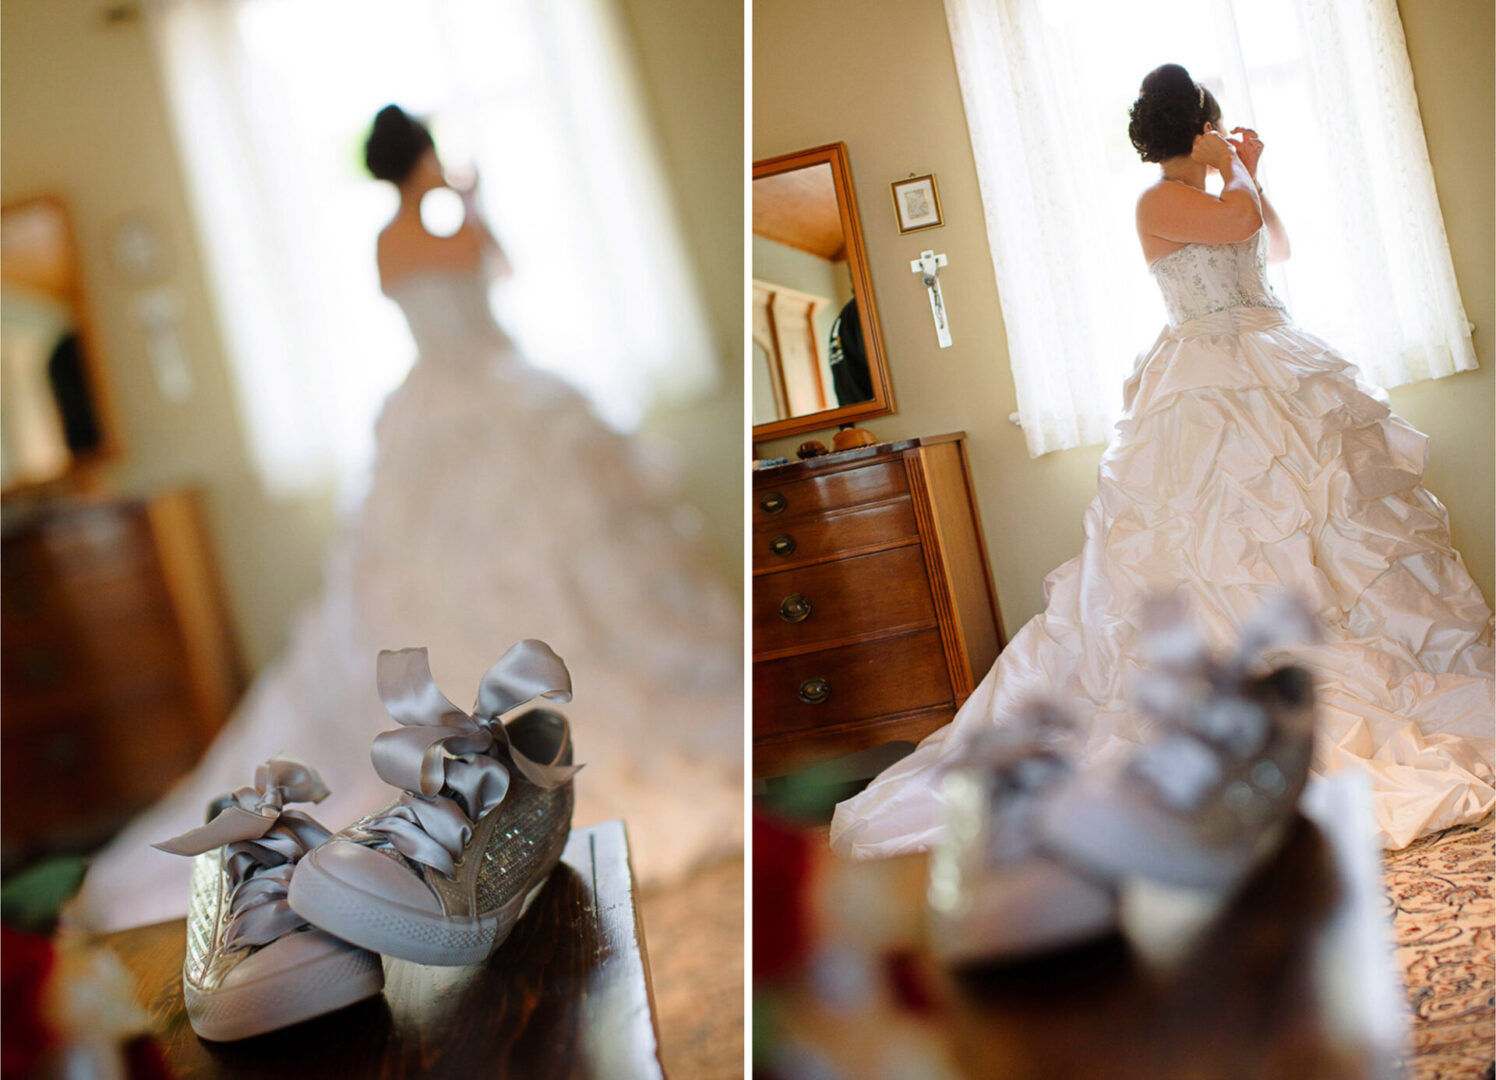 Collage image of a bride getting ready